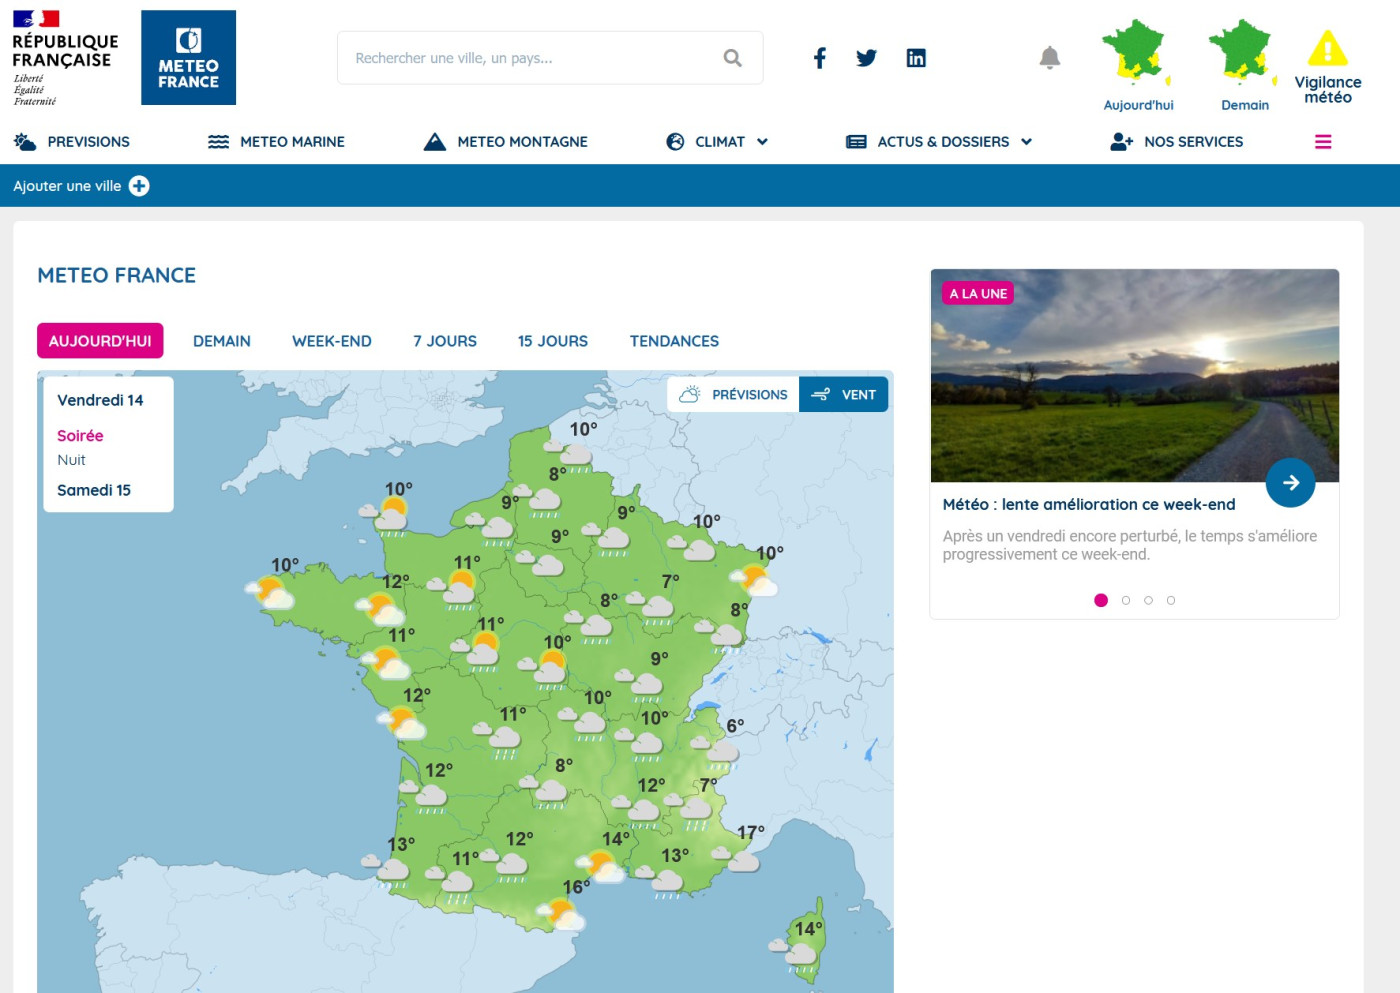 Météo-France suffered a cyberattack, causing an outage